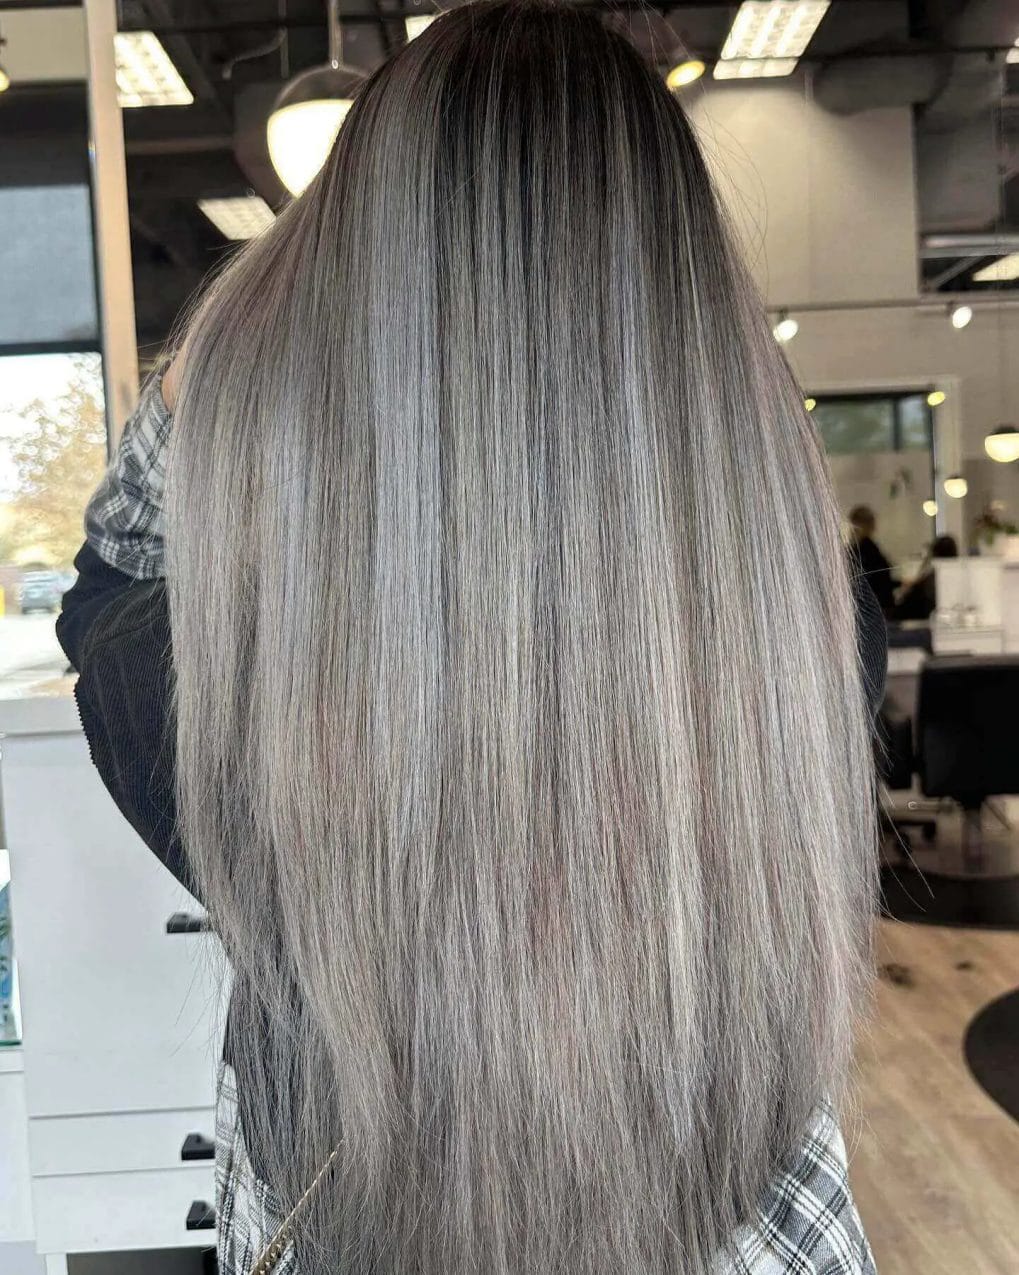 Long straight hair with balayage transition from dark roots to ashy silver.